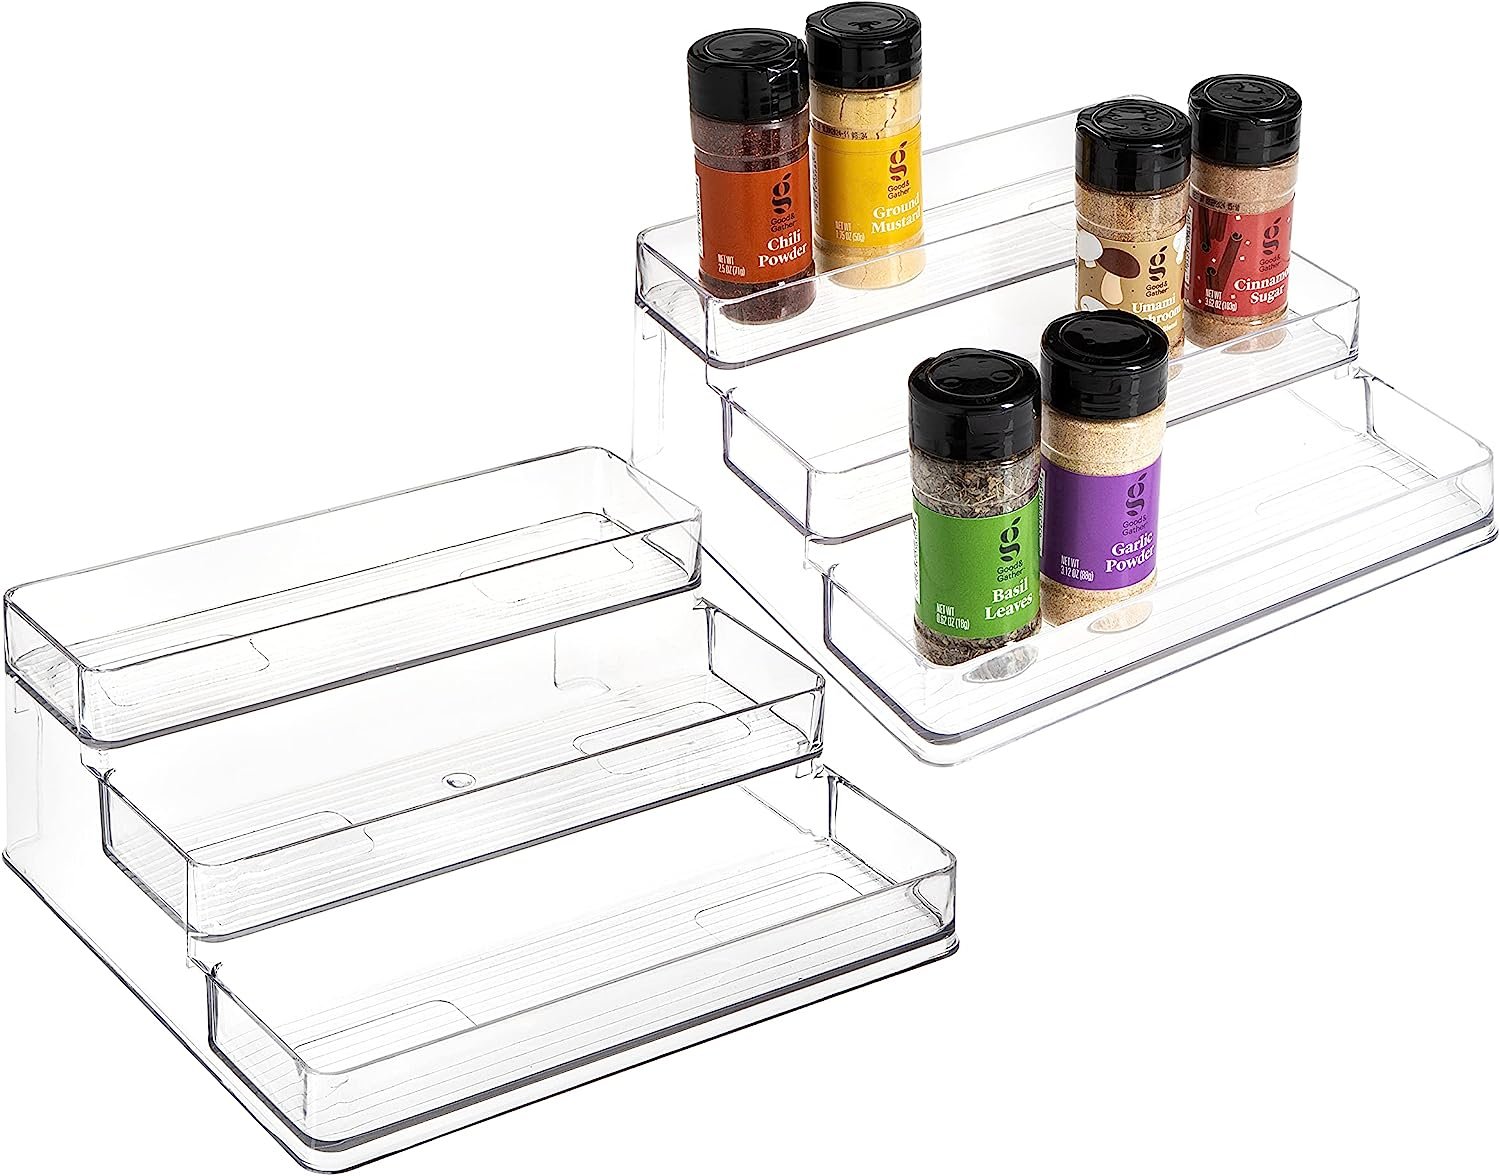 SIMPLEMADE SPICE RACK